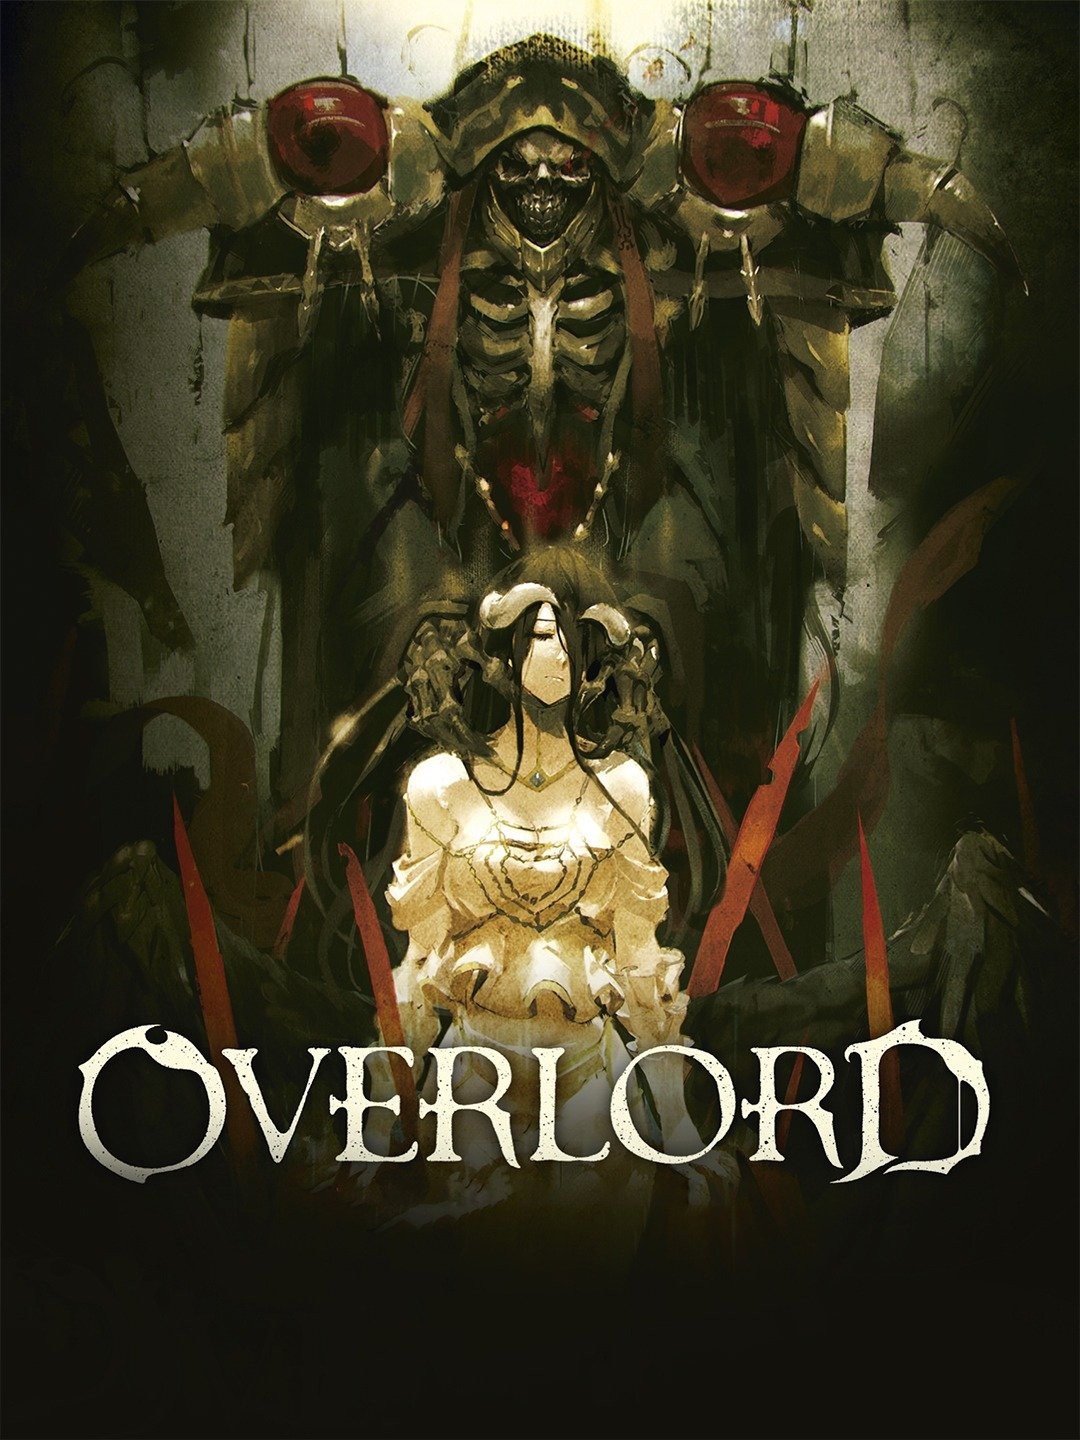 Can you recommend some anime like Overlord where the MC is so